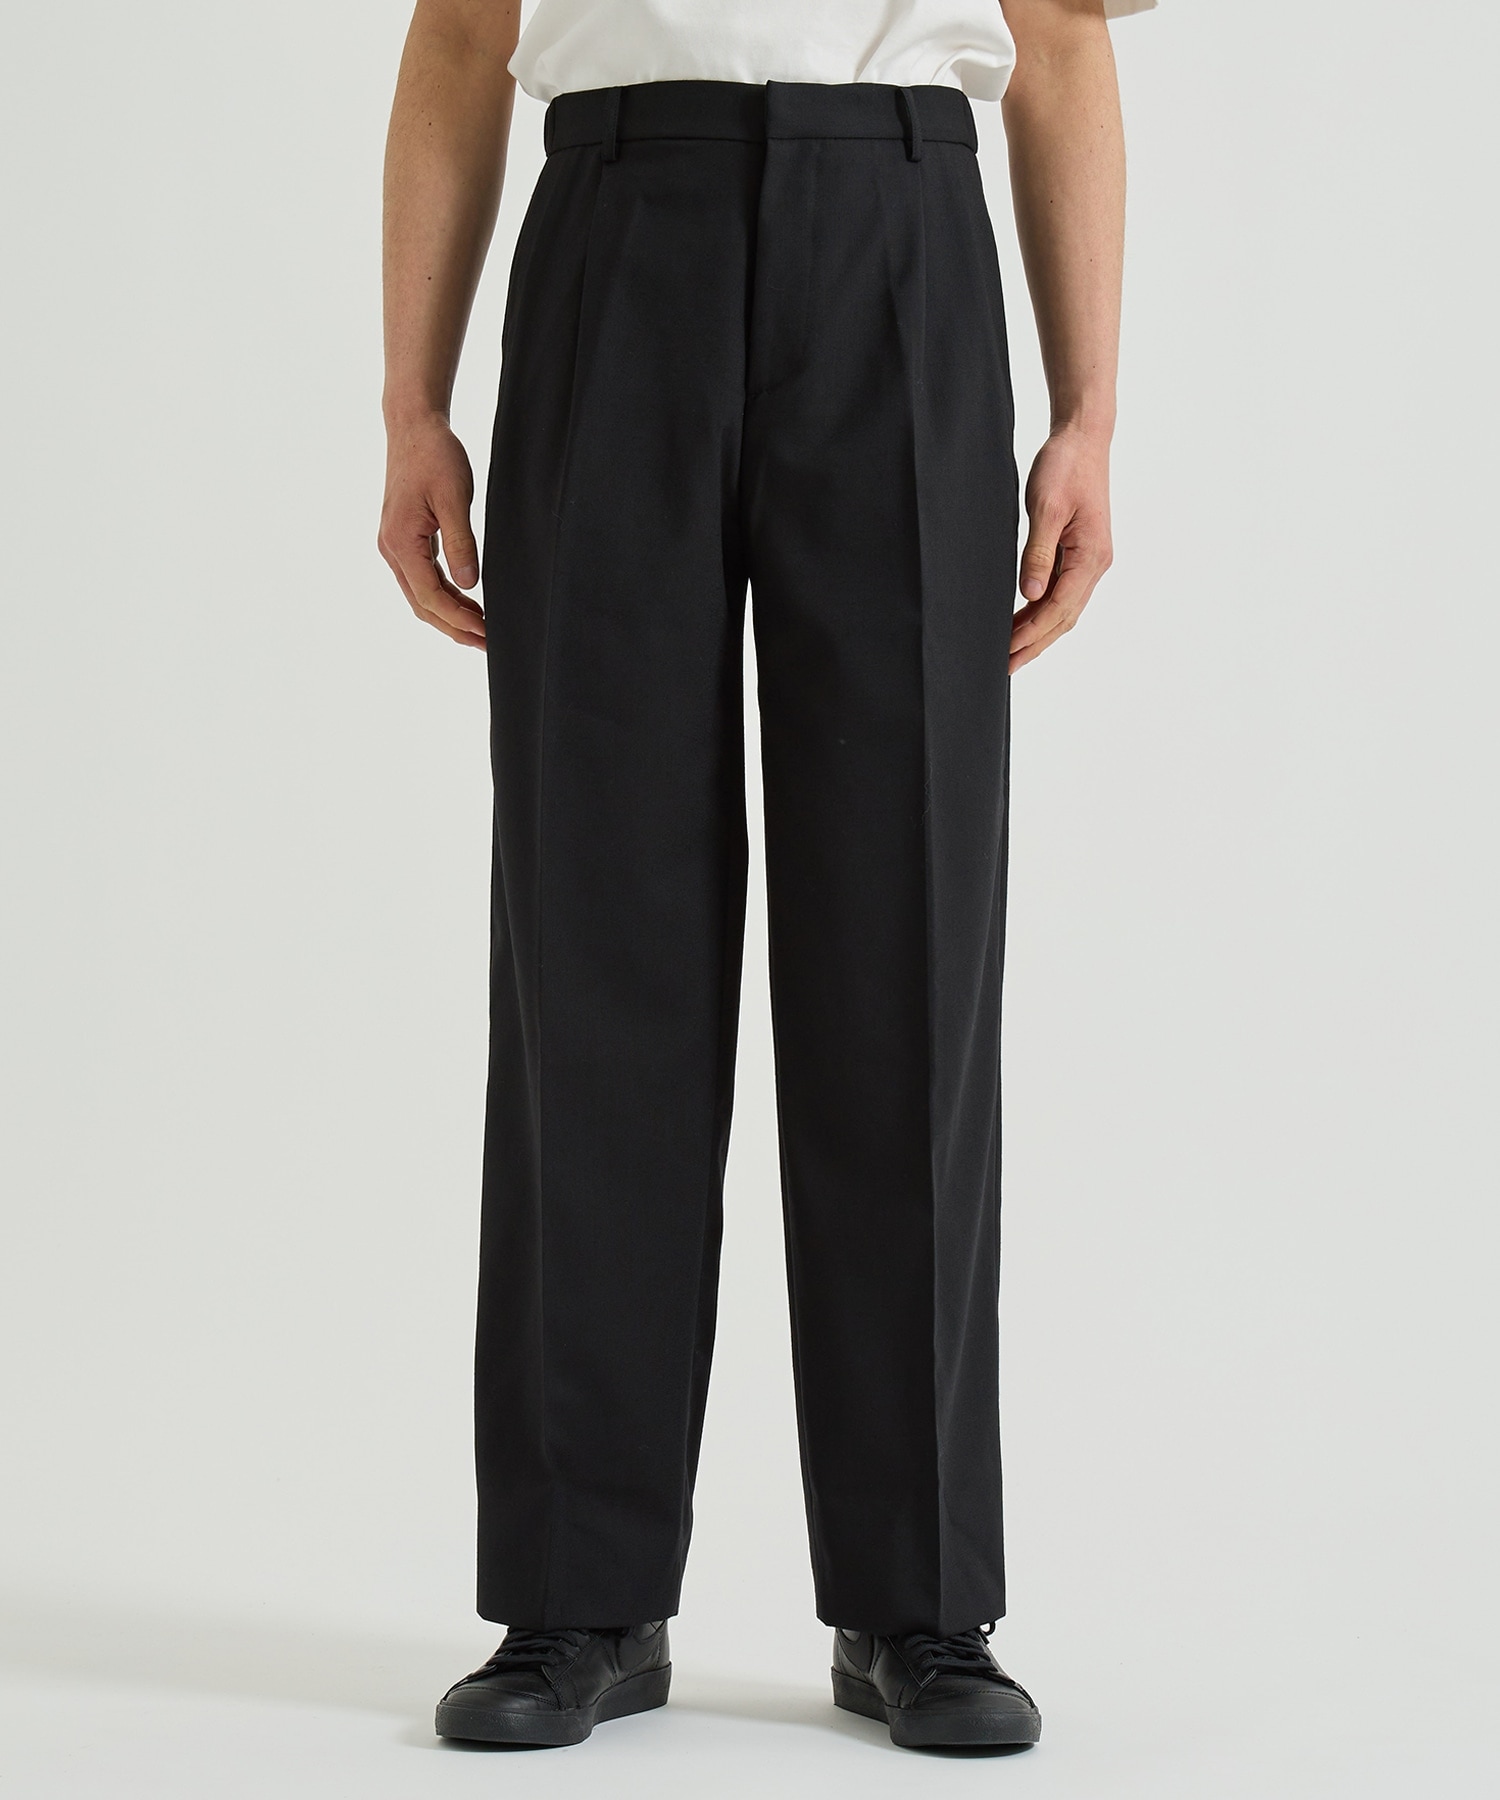 Summer Wool Calm Skin Easy Straight Trousers THE TOKYO